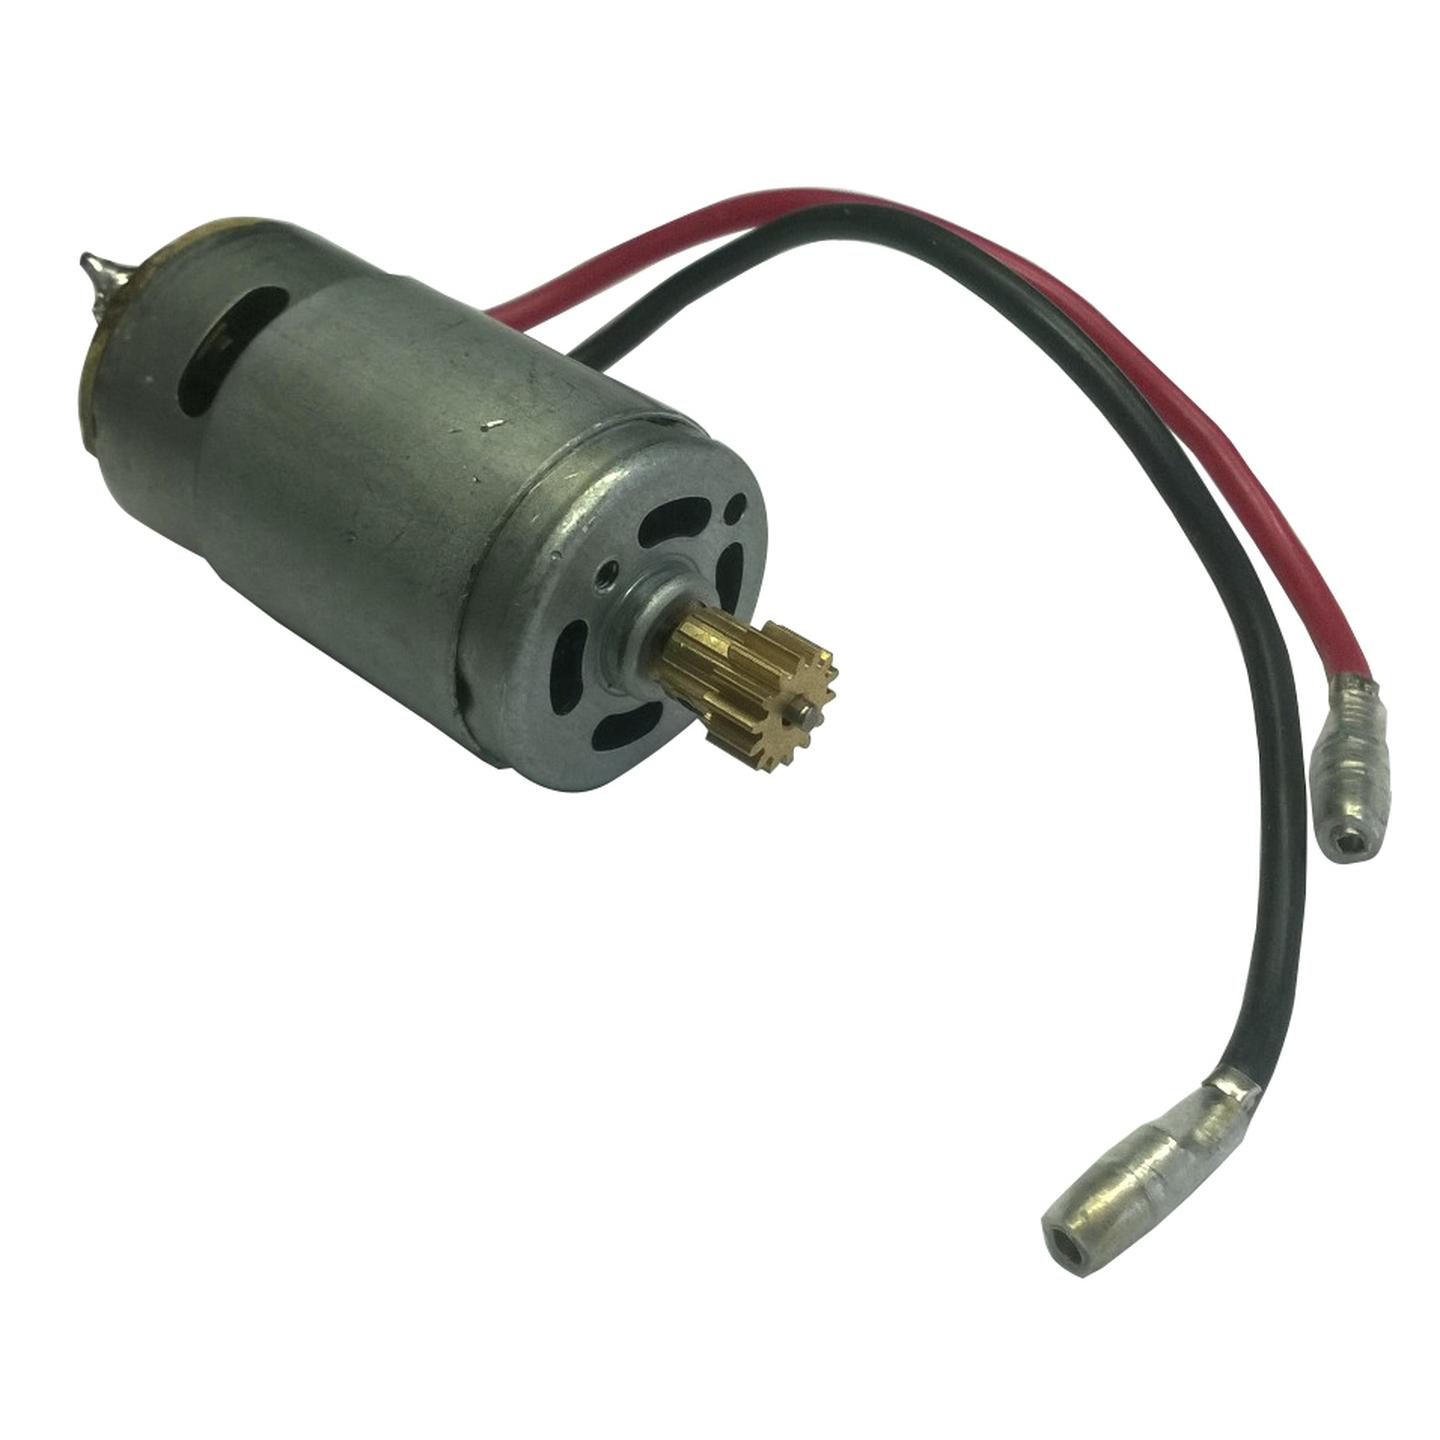 Spare DC Motor to suit GT-3786 